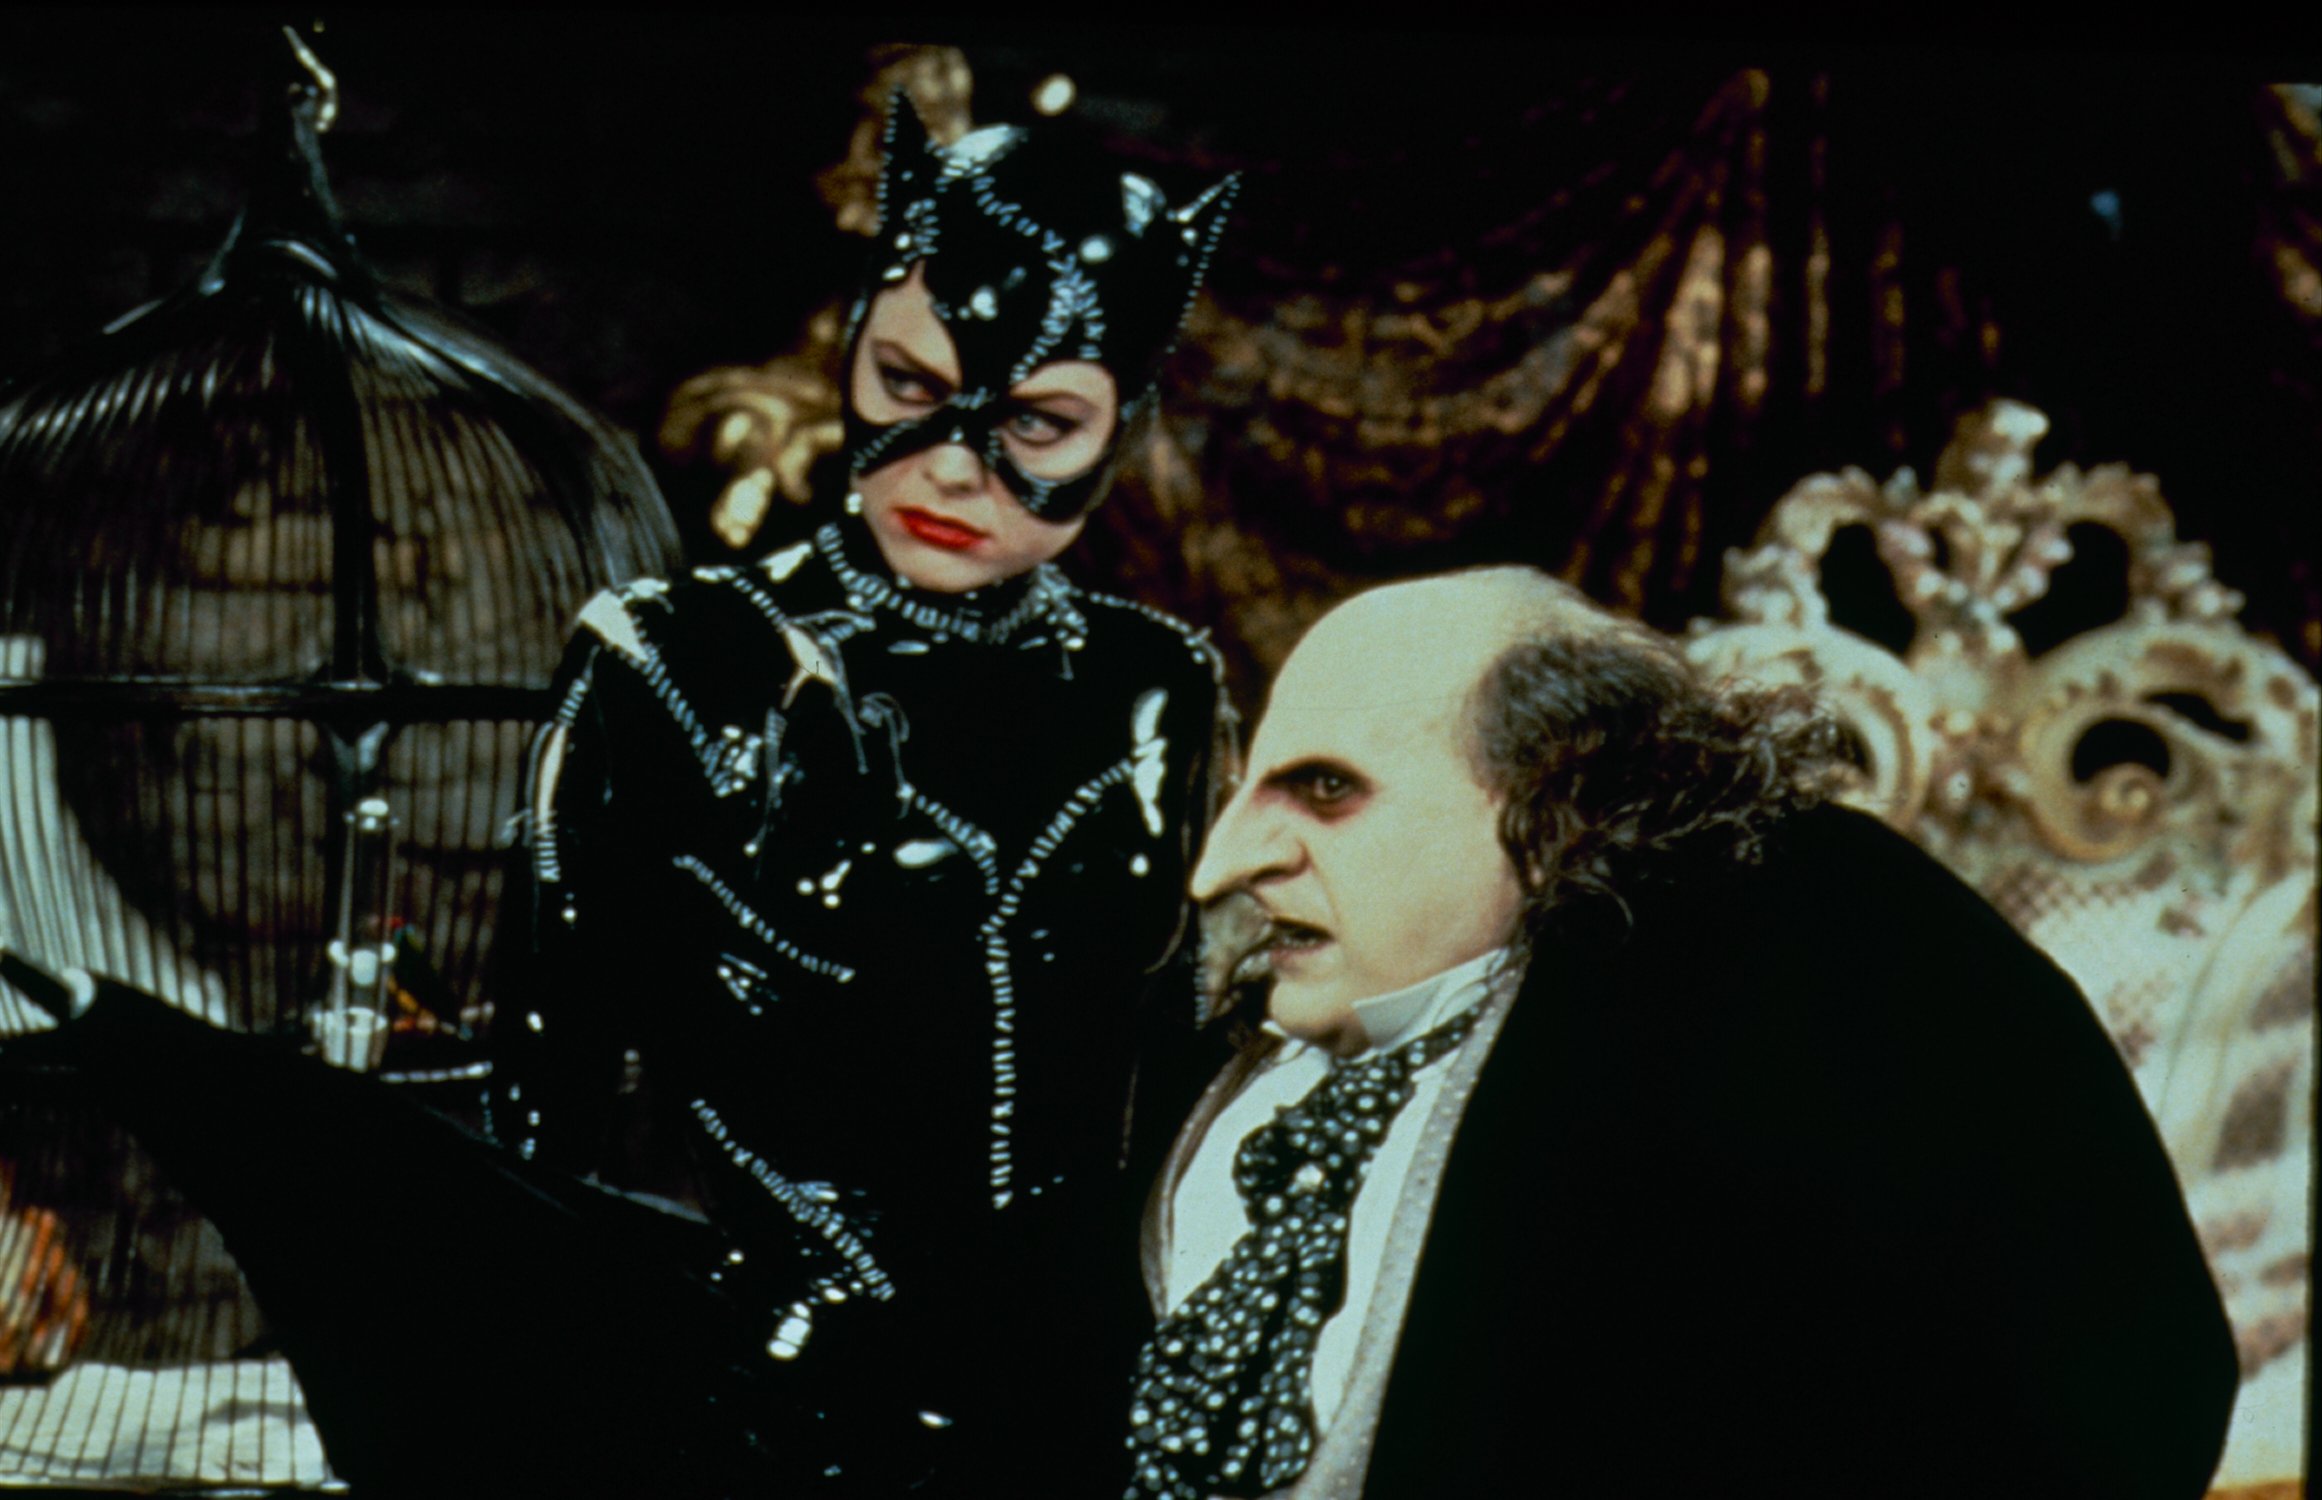 Catwoman and the Penguin near a birdcage